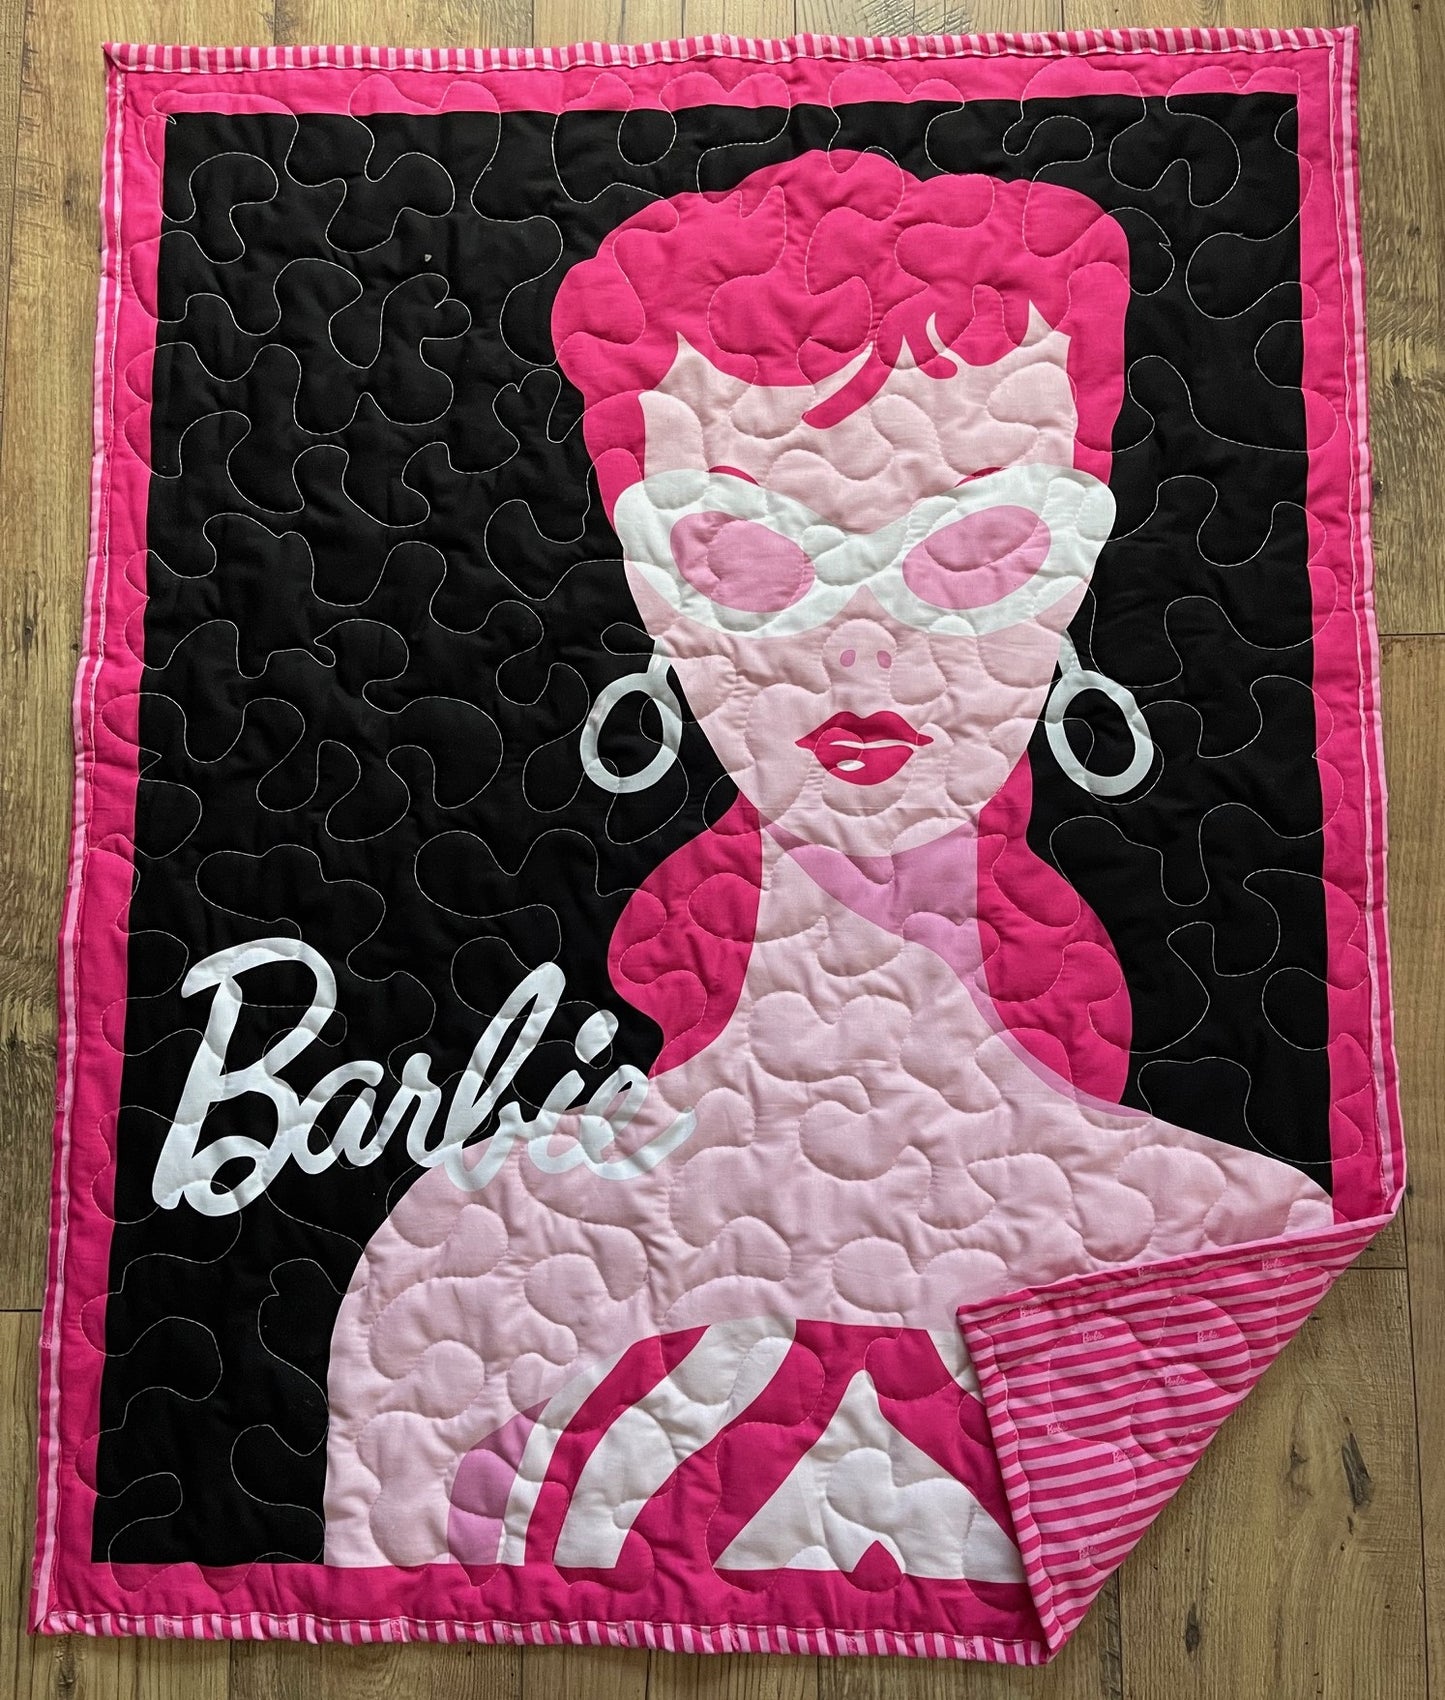 BARBIE Quilted Blanket 36"x44" 100% Cotton